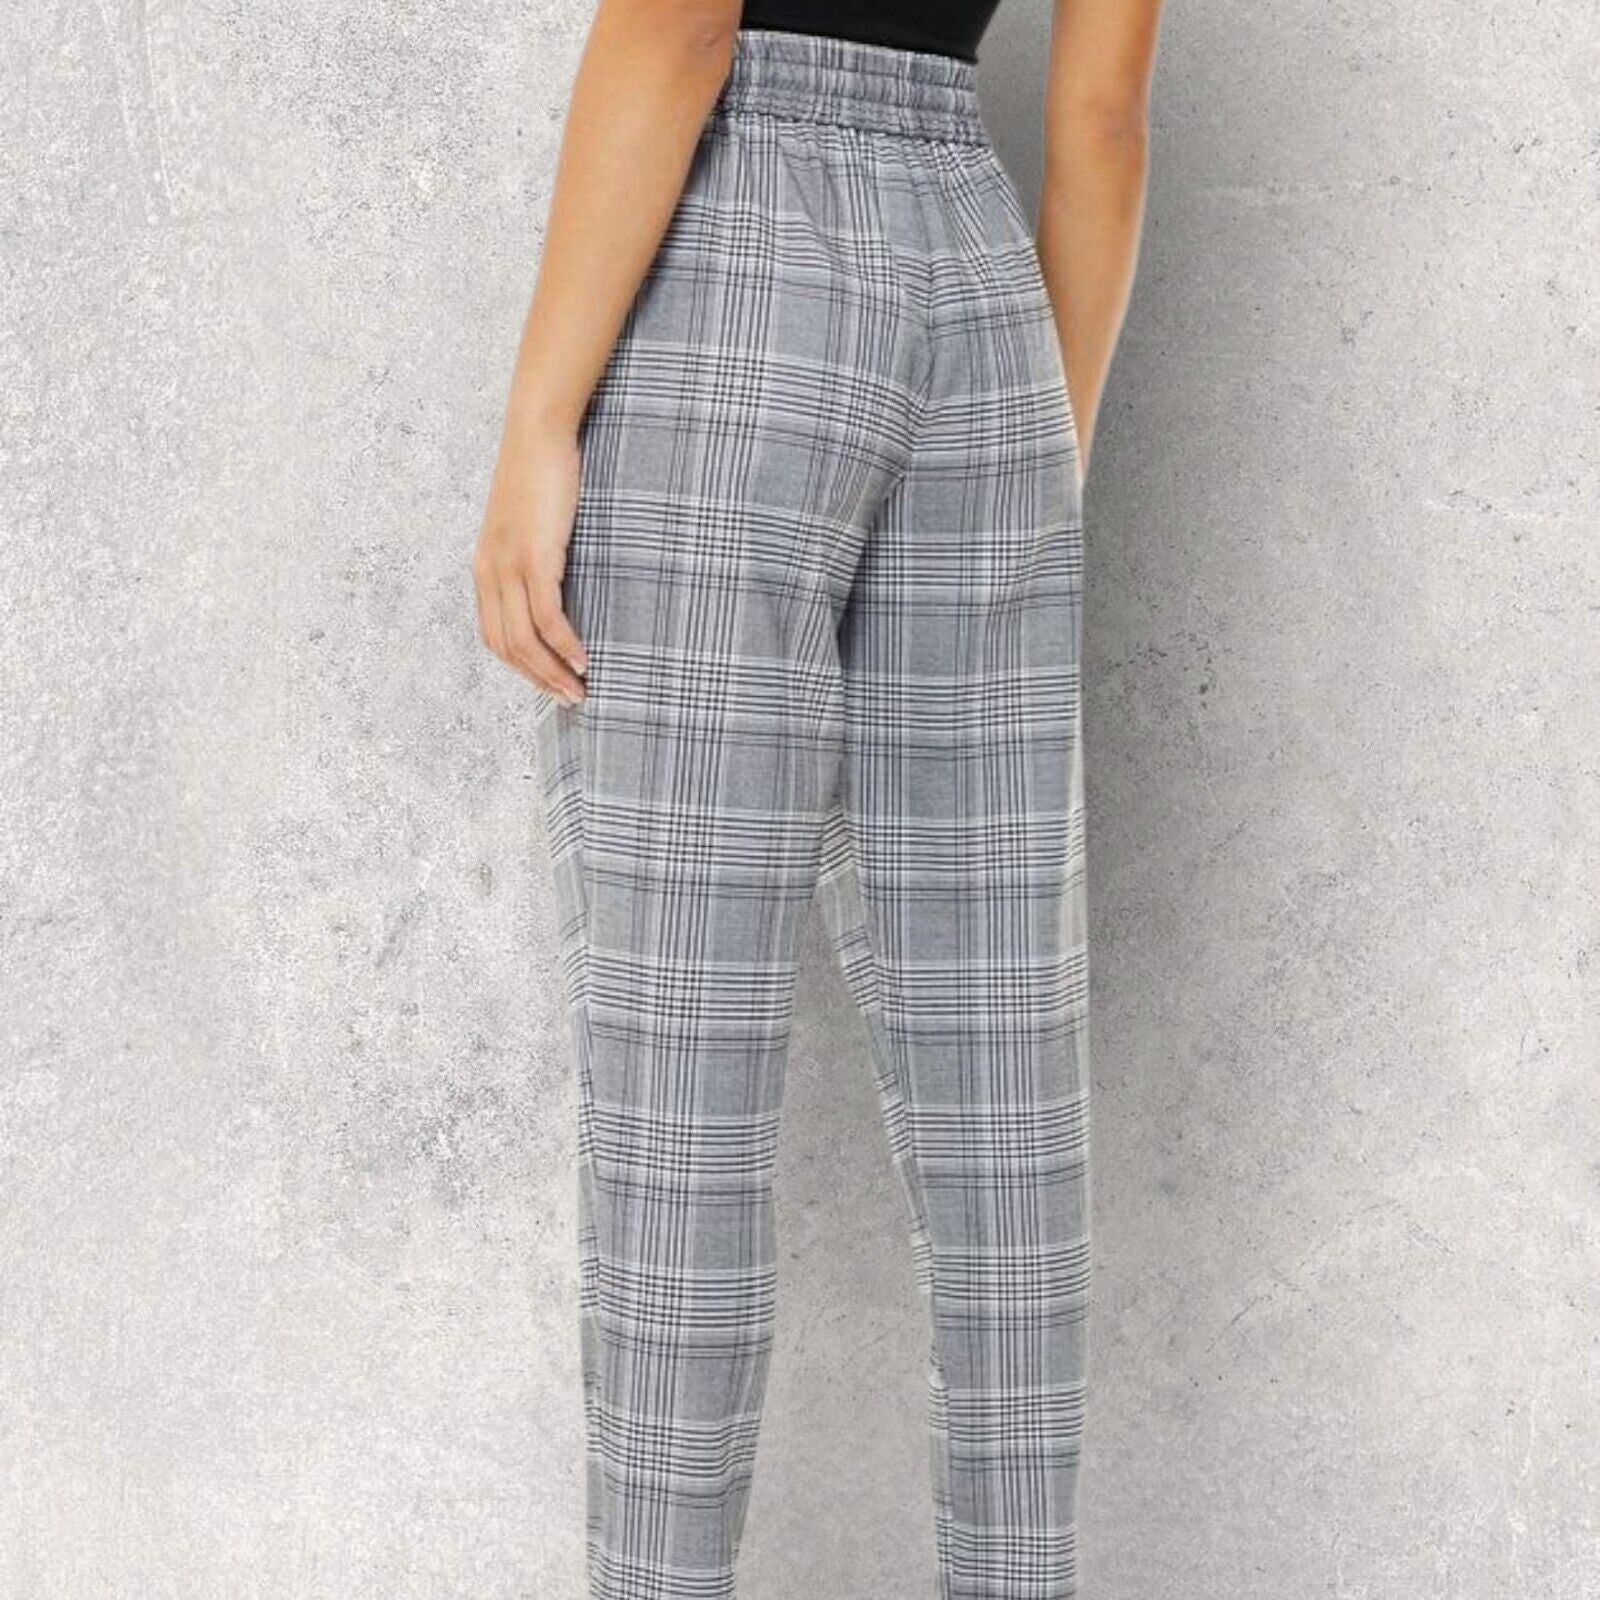 Marie Mero Grey Prince of Wales Check Tapered Trousers UK 8 US 4 EU 36 RRP £129 Timeless Fashions